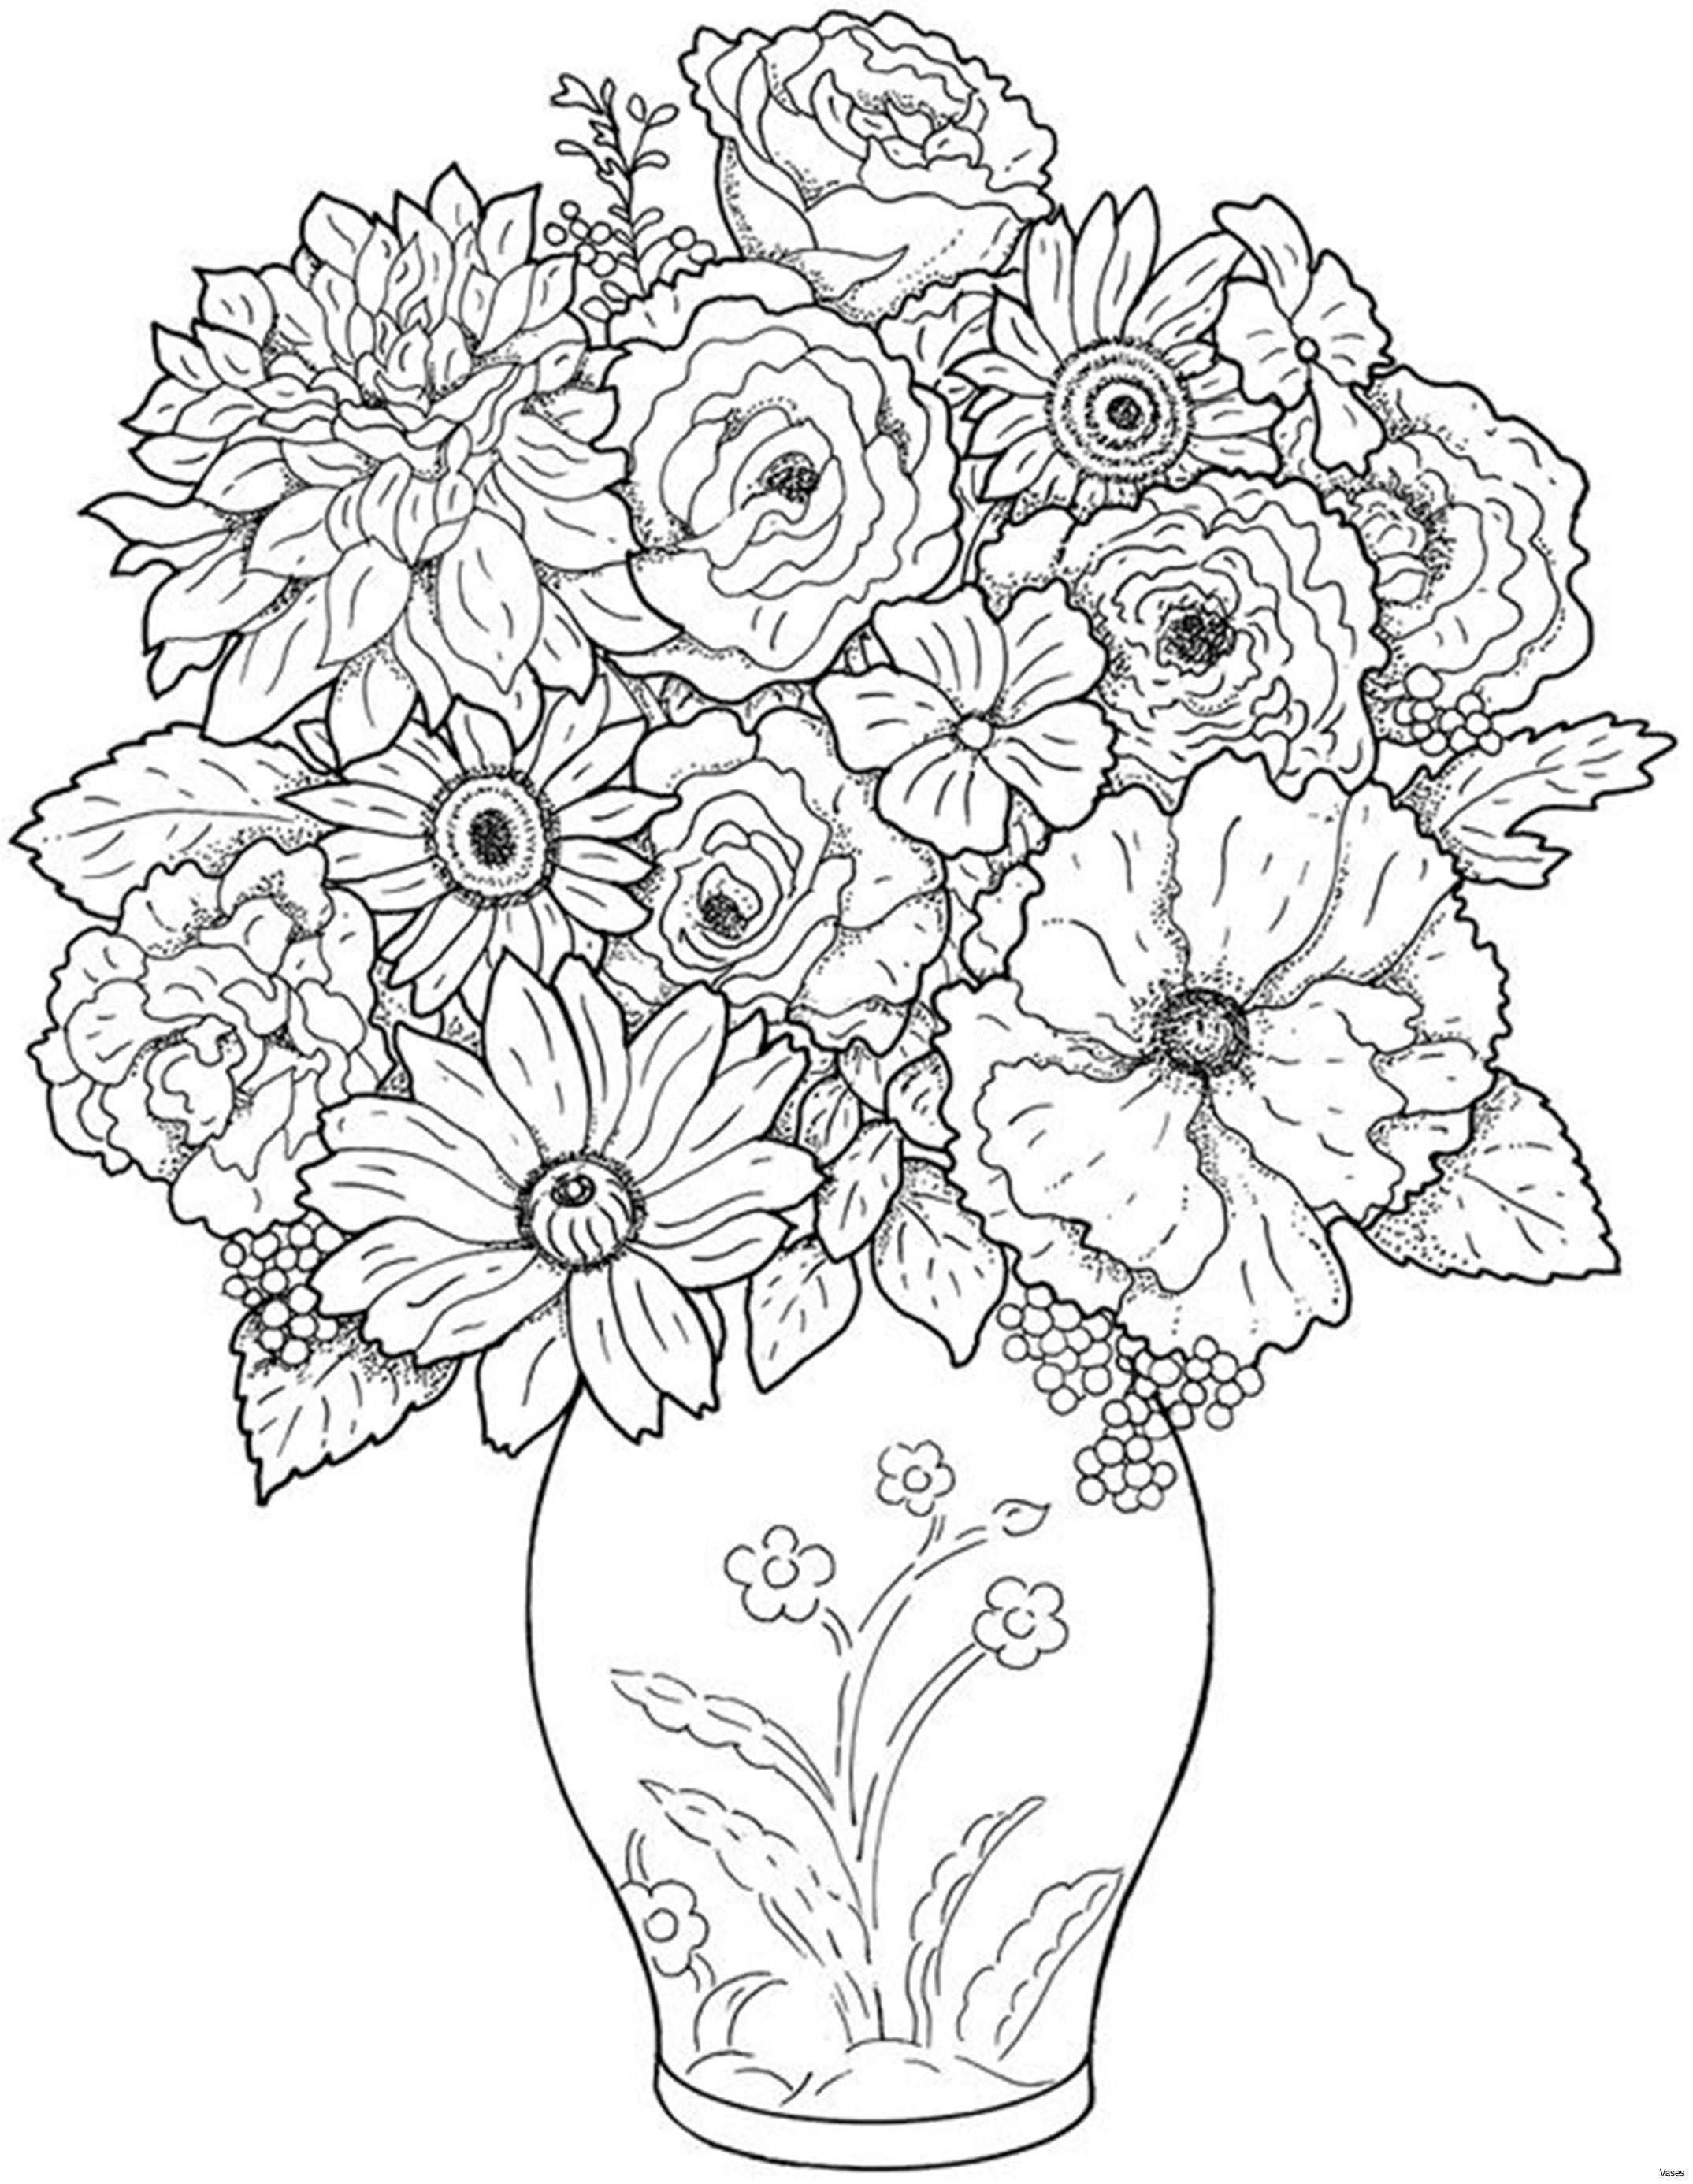 13 Awesome Flower Vase Garden 2024 free download flower vase garden of blue coloring pages vases flower vase coloring page pages flowers intended for cool vases flower vase coloring page pages flowers in a top i 0d ruvacoloring book flower